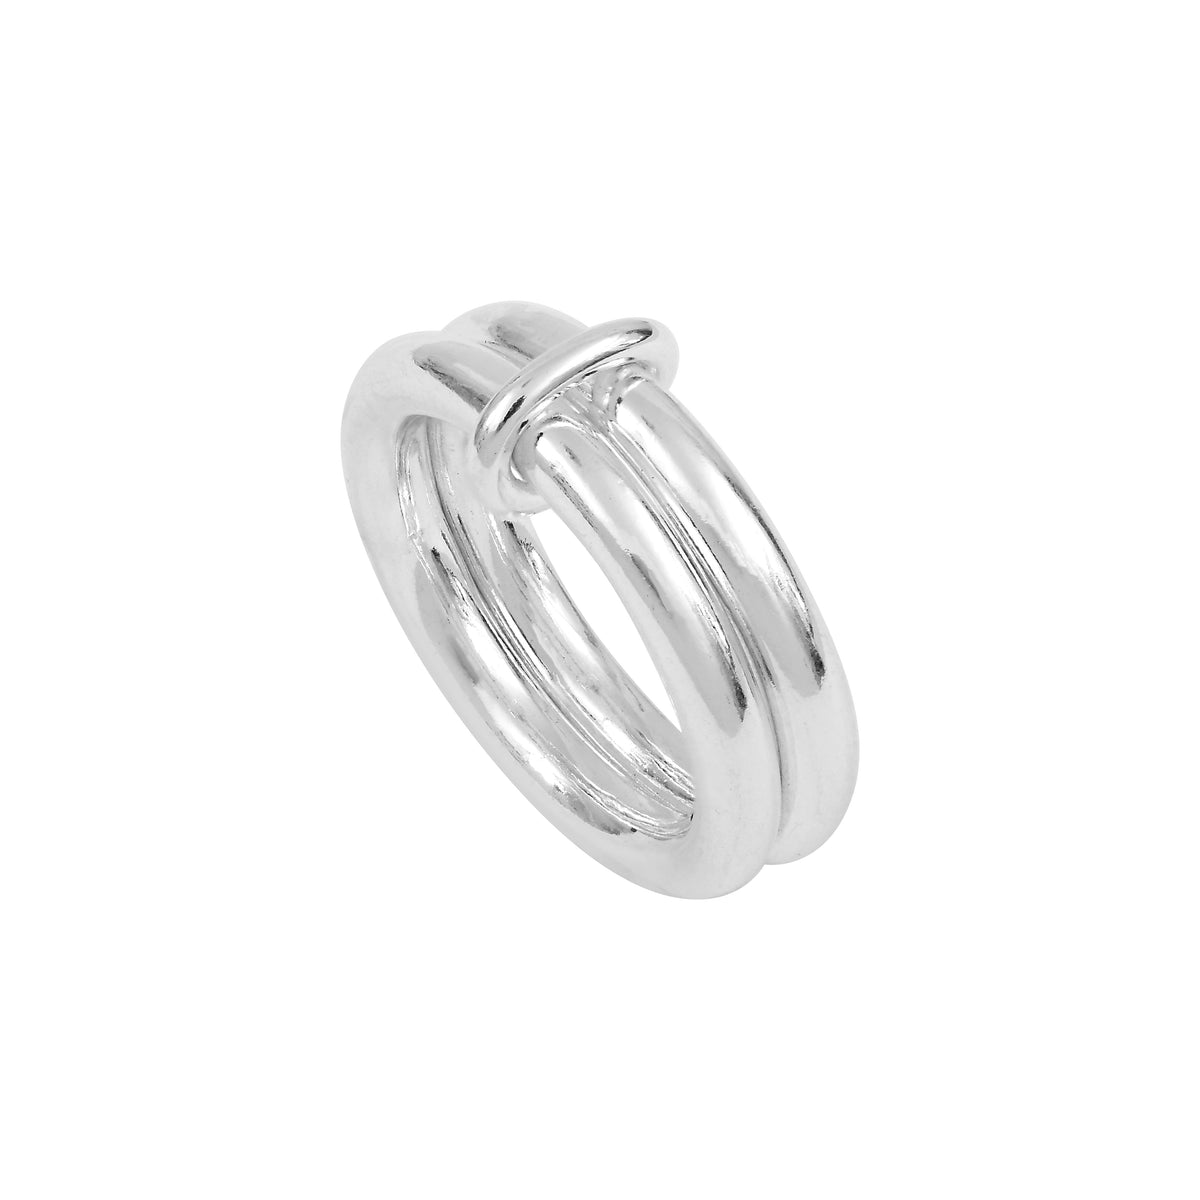 The Billie 3mm ring is made of 925°°° silver and is composed of two thin rings of 3mm diameter.